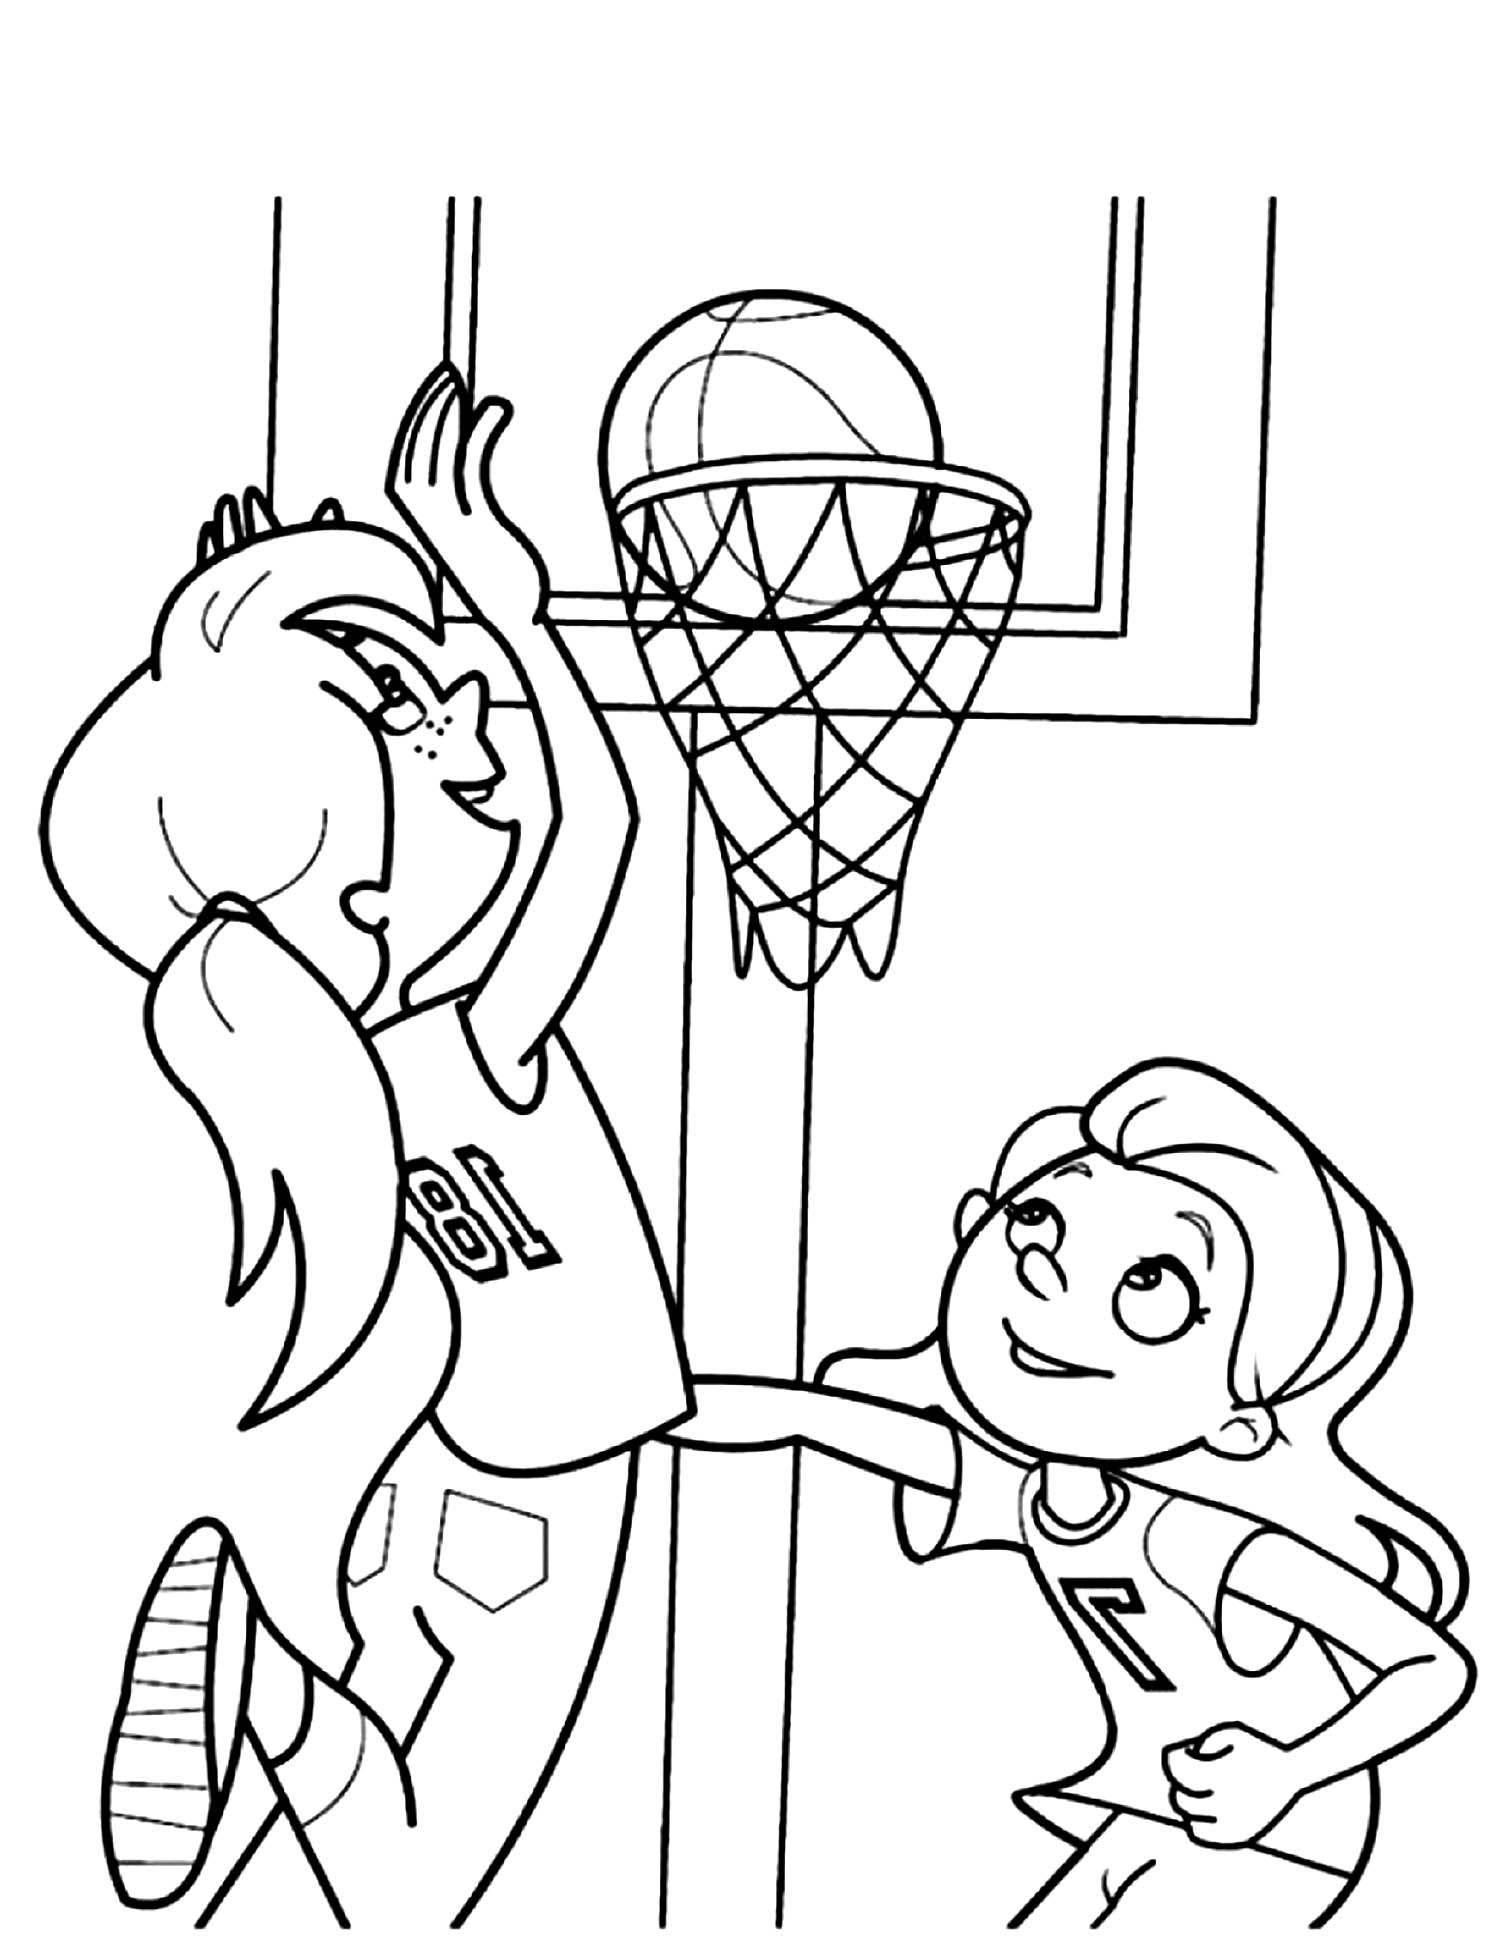 Girls Playing Basketball Coloring Page - Letscolorit.com